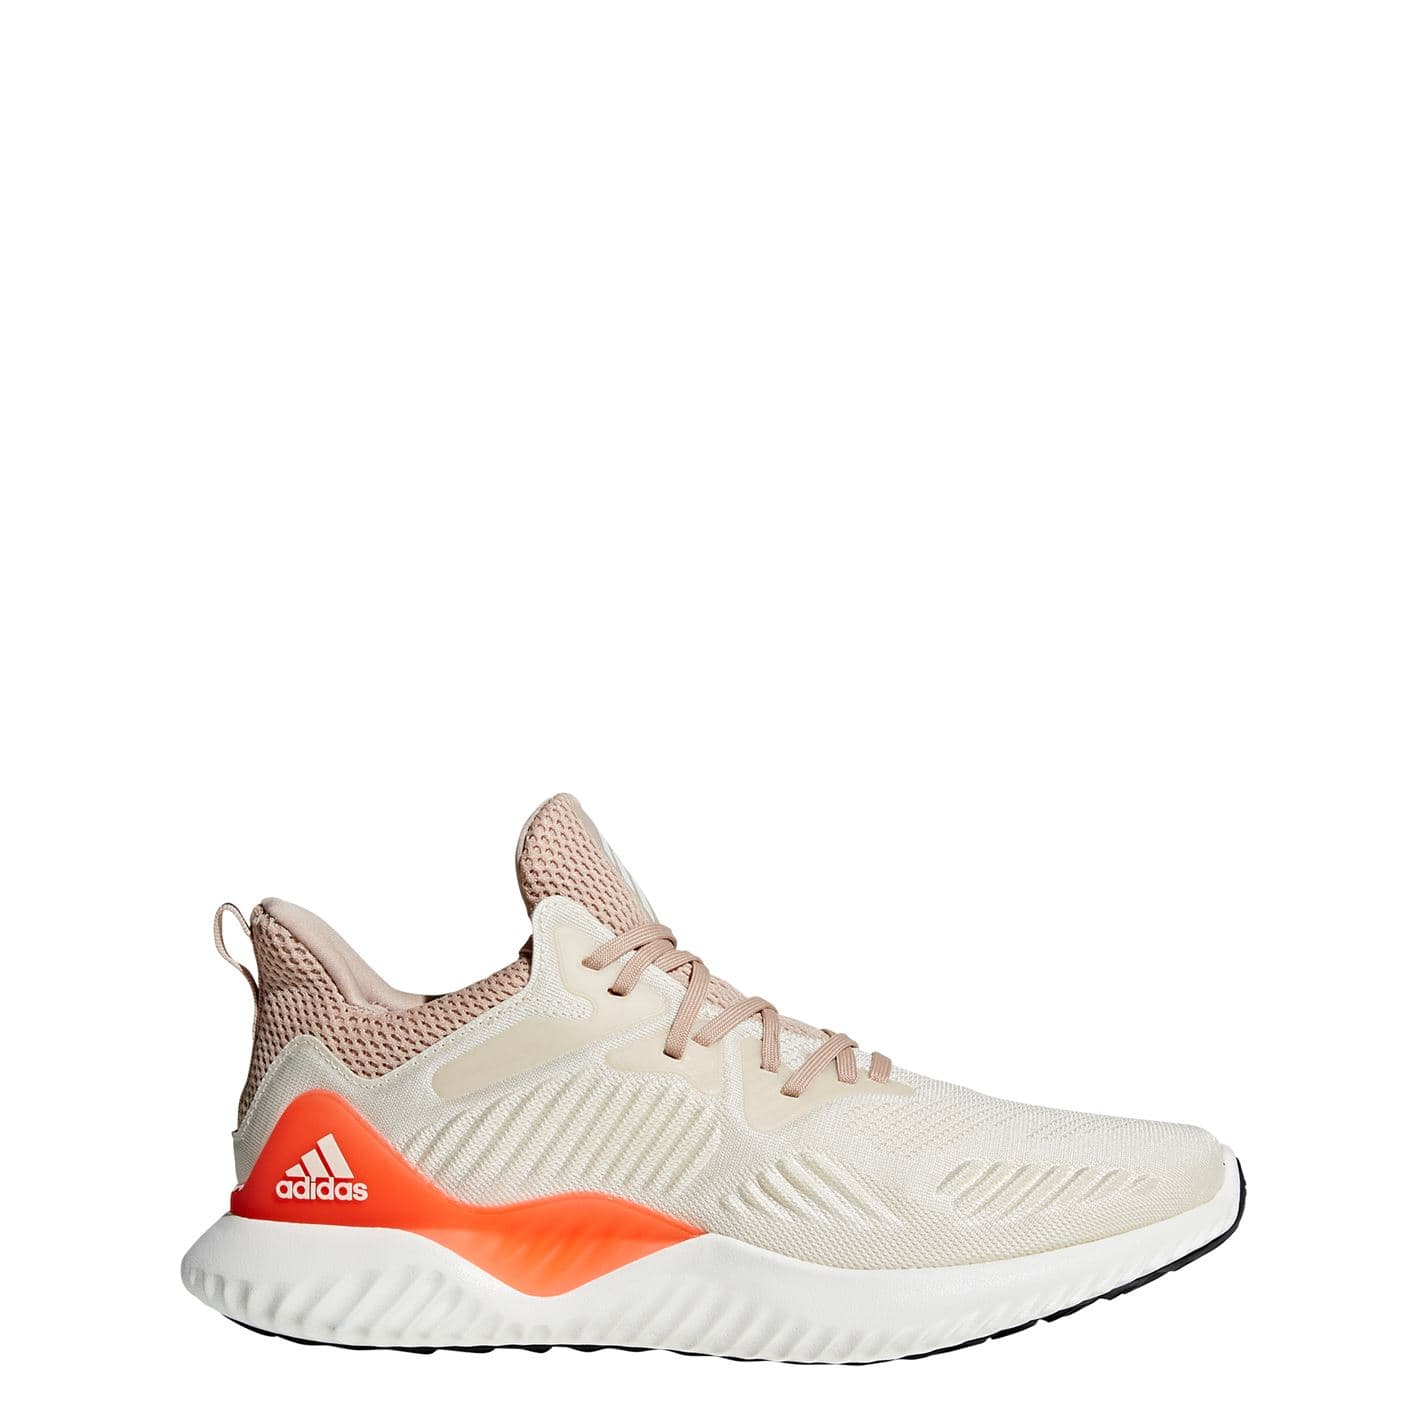 Adidas Alphabounce Beyond Men's Trainers